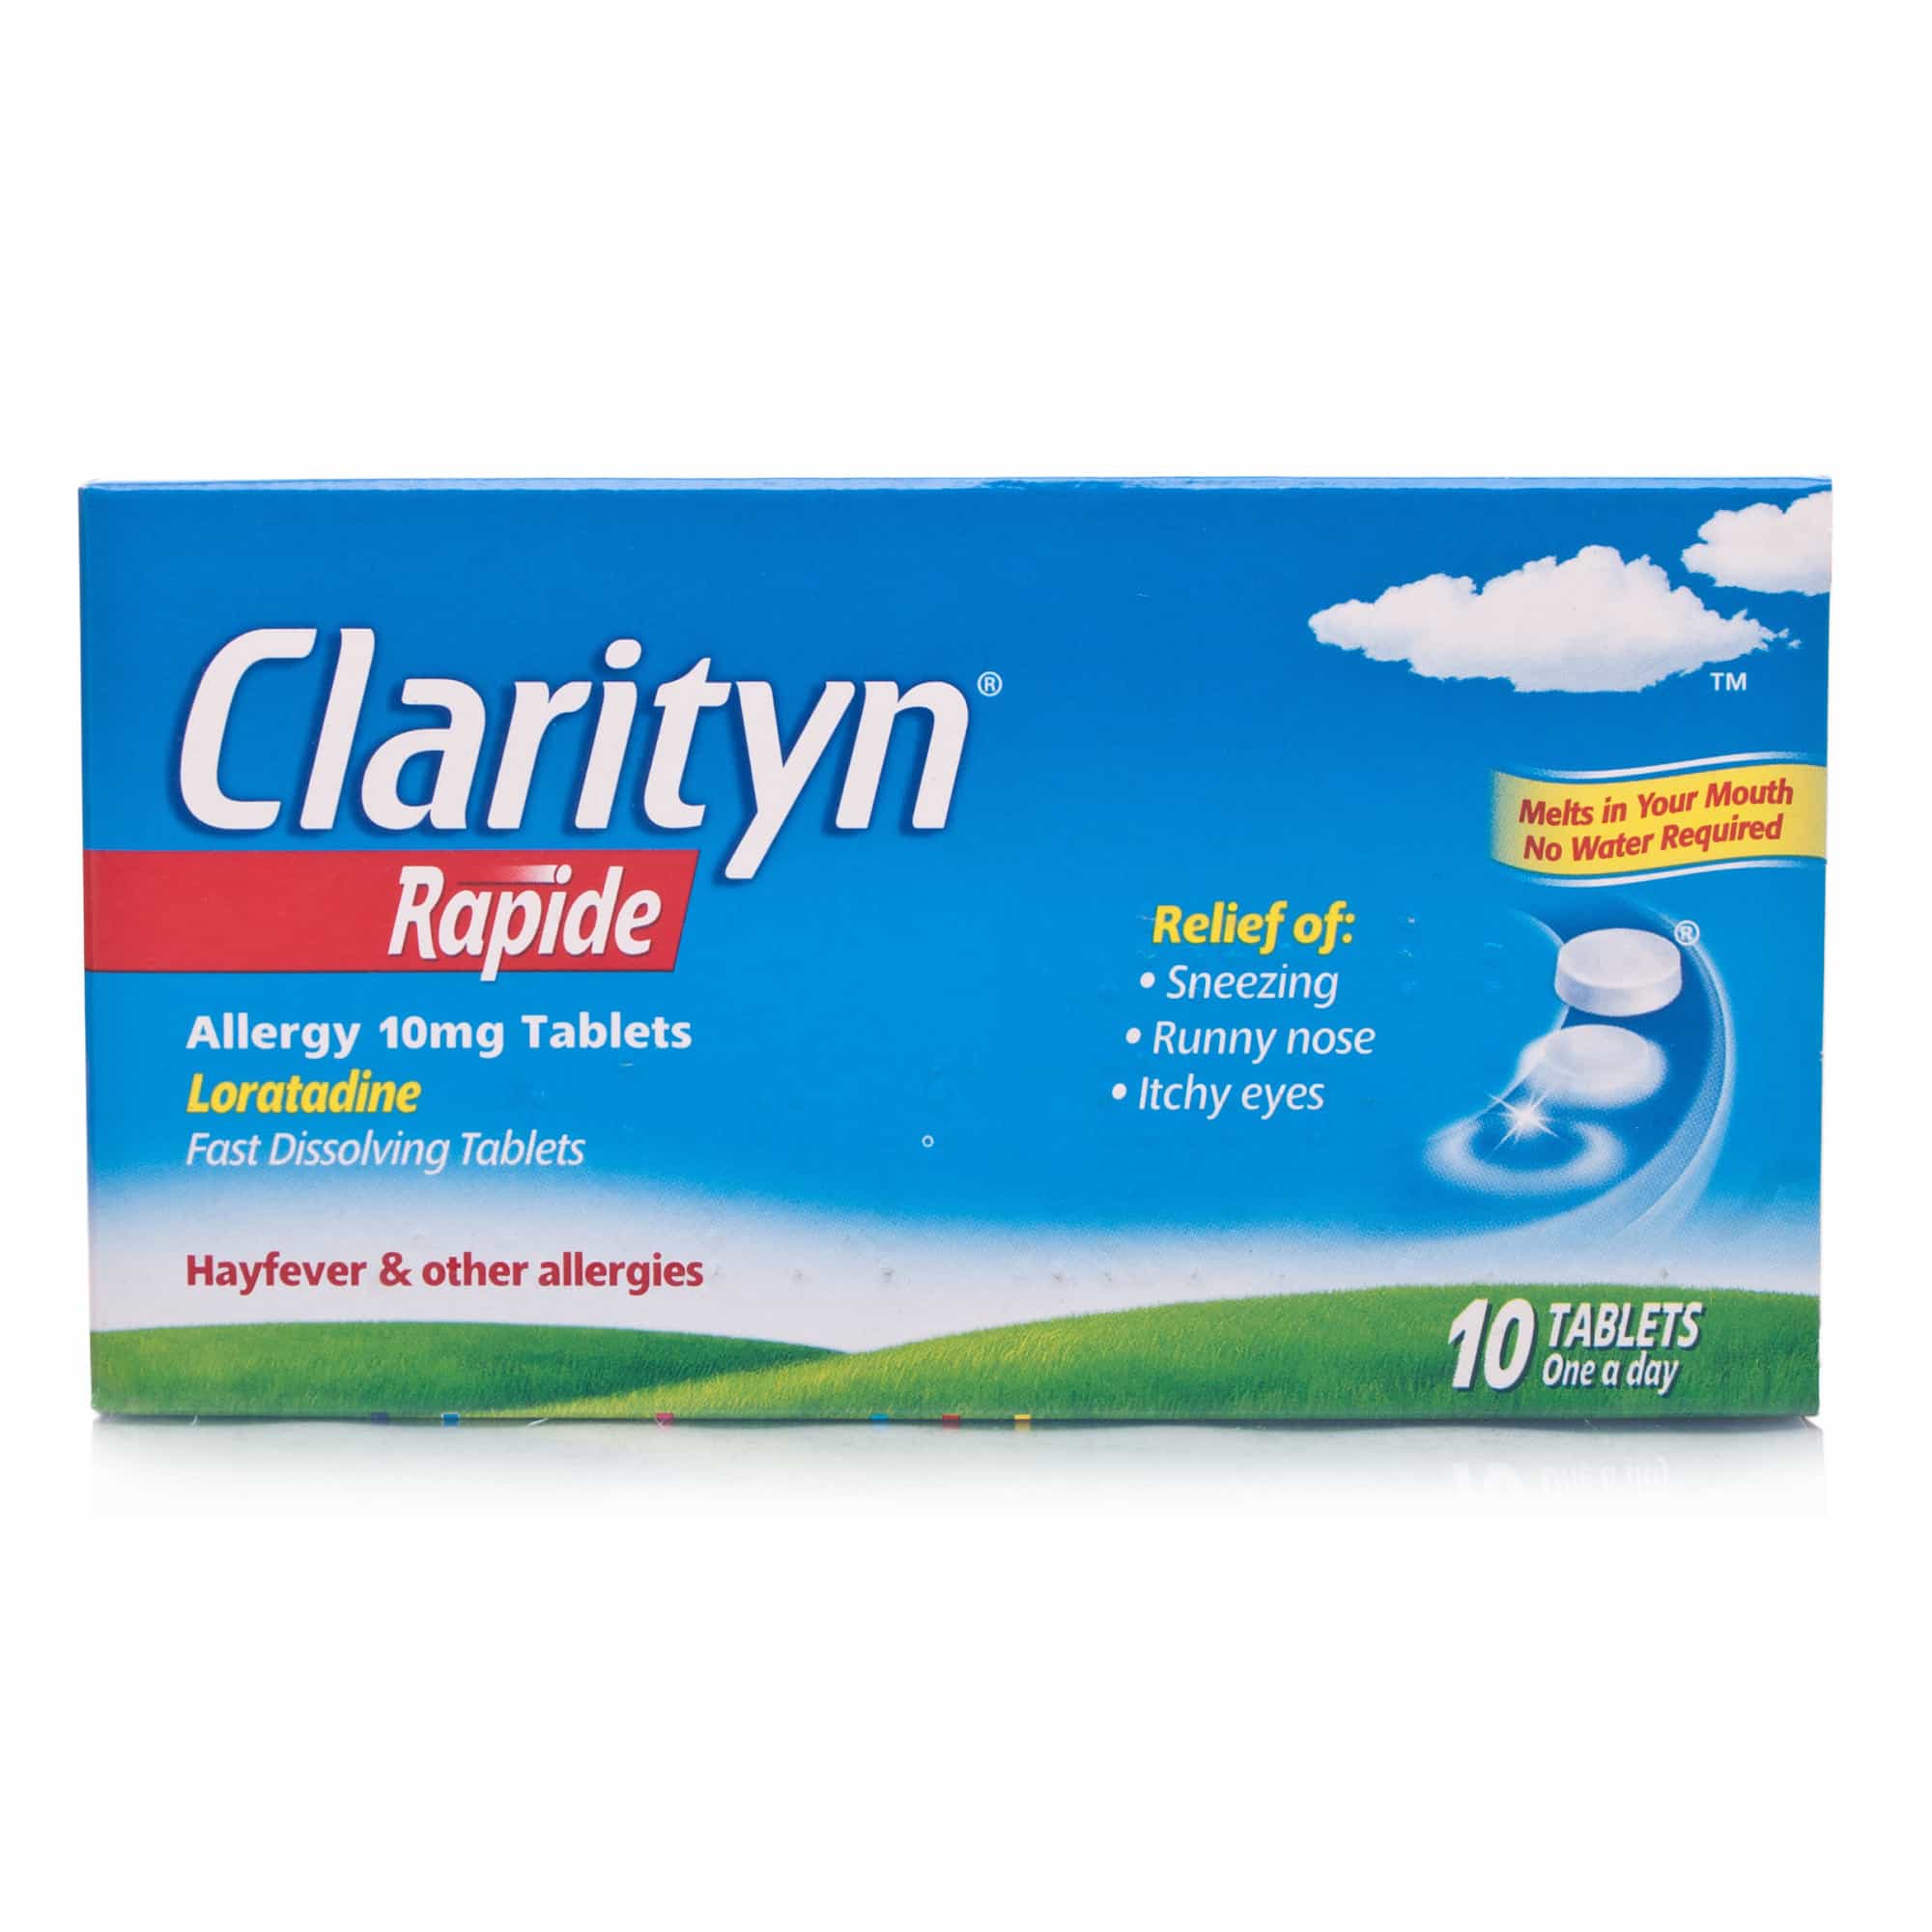 Clarityn Rapide Allergy 10 mg Tablets